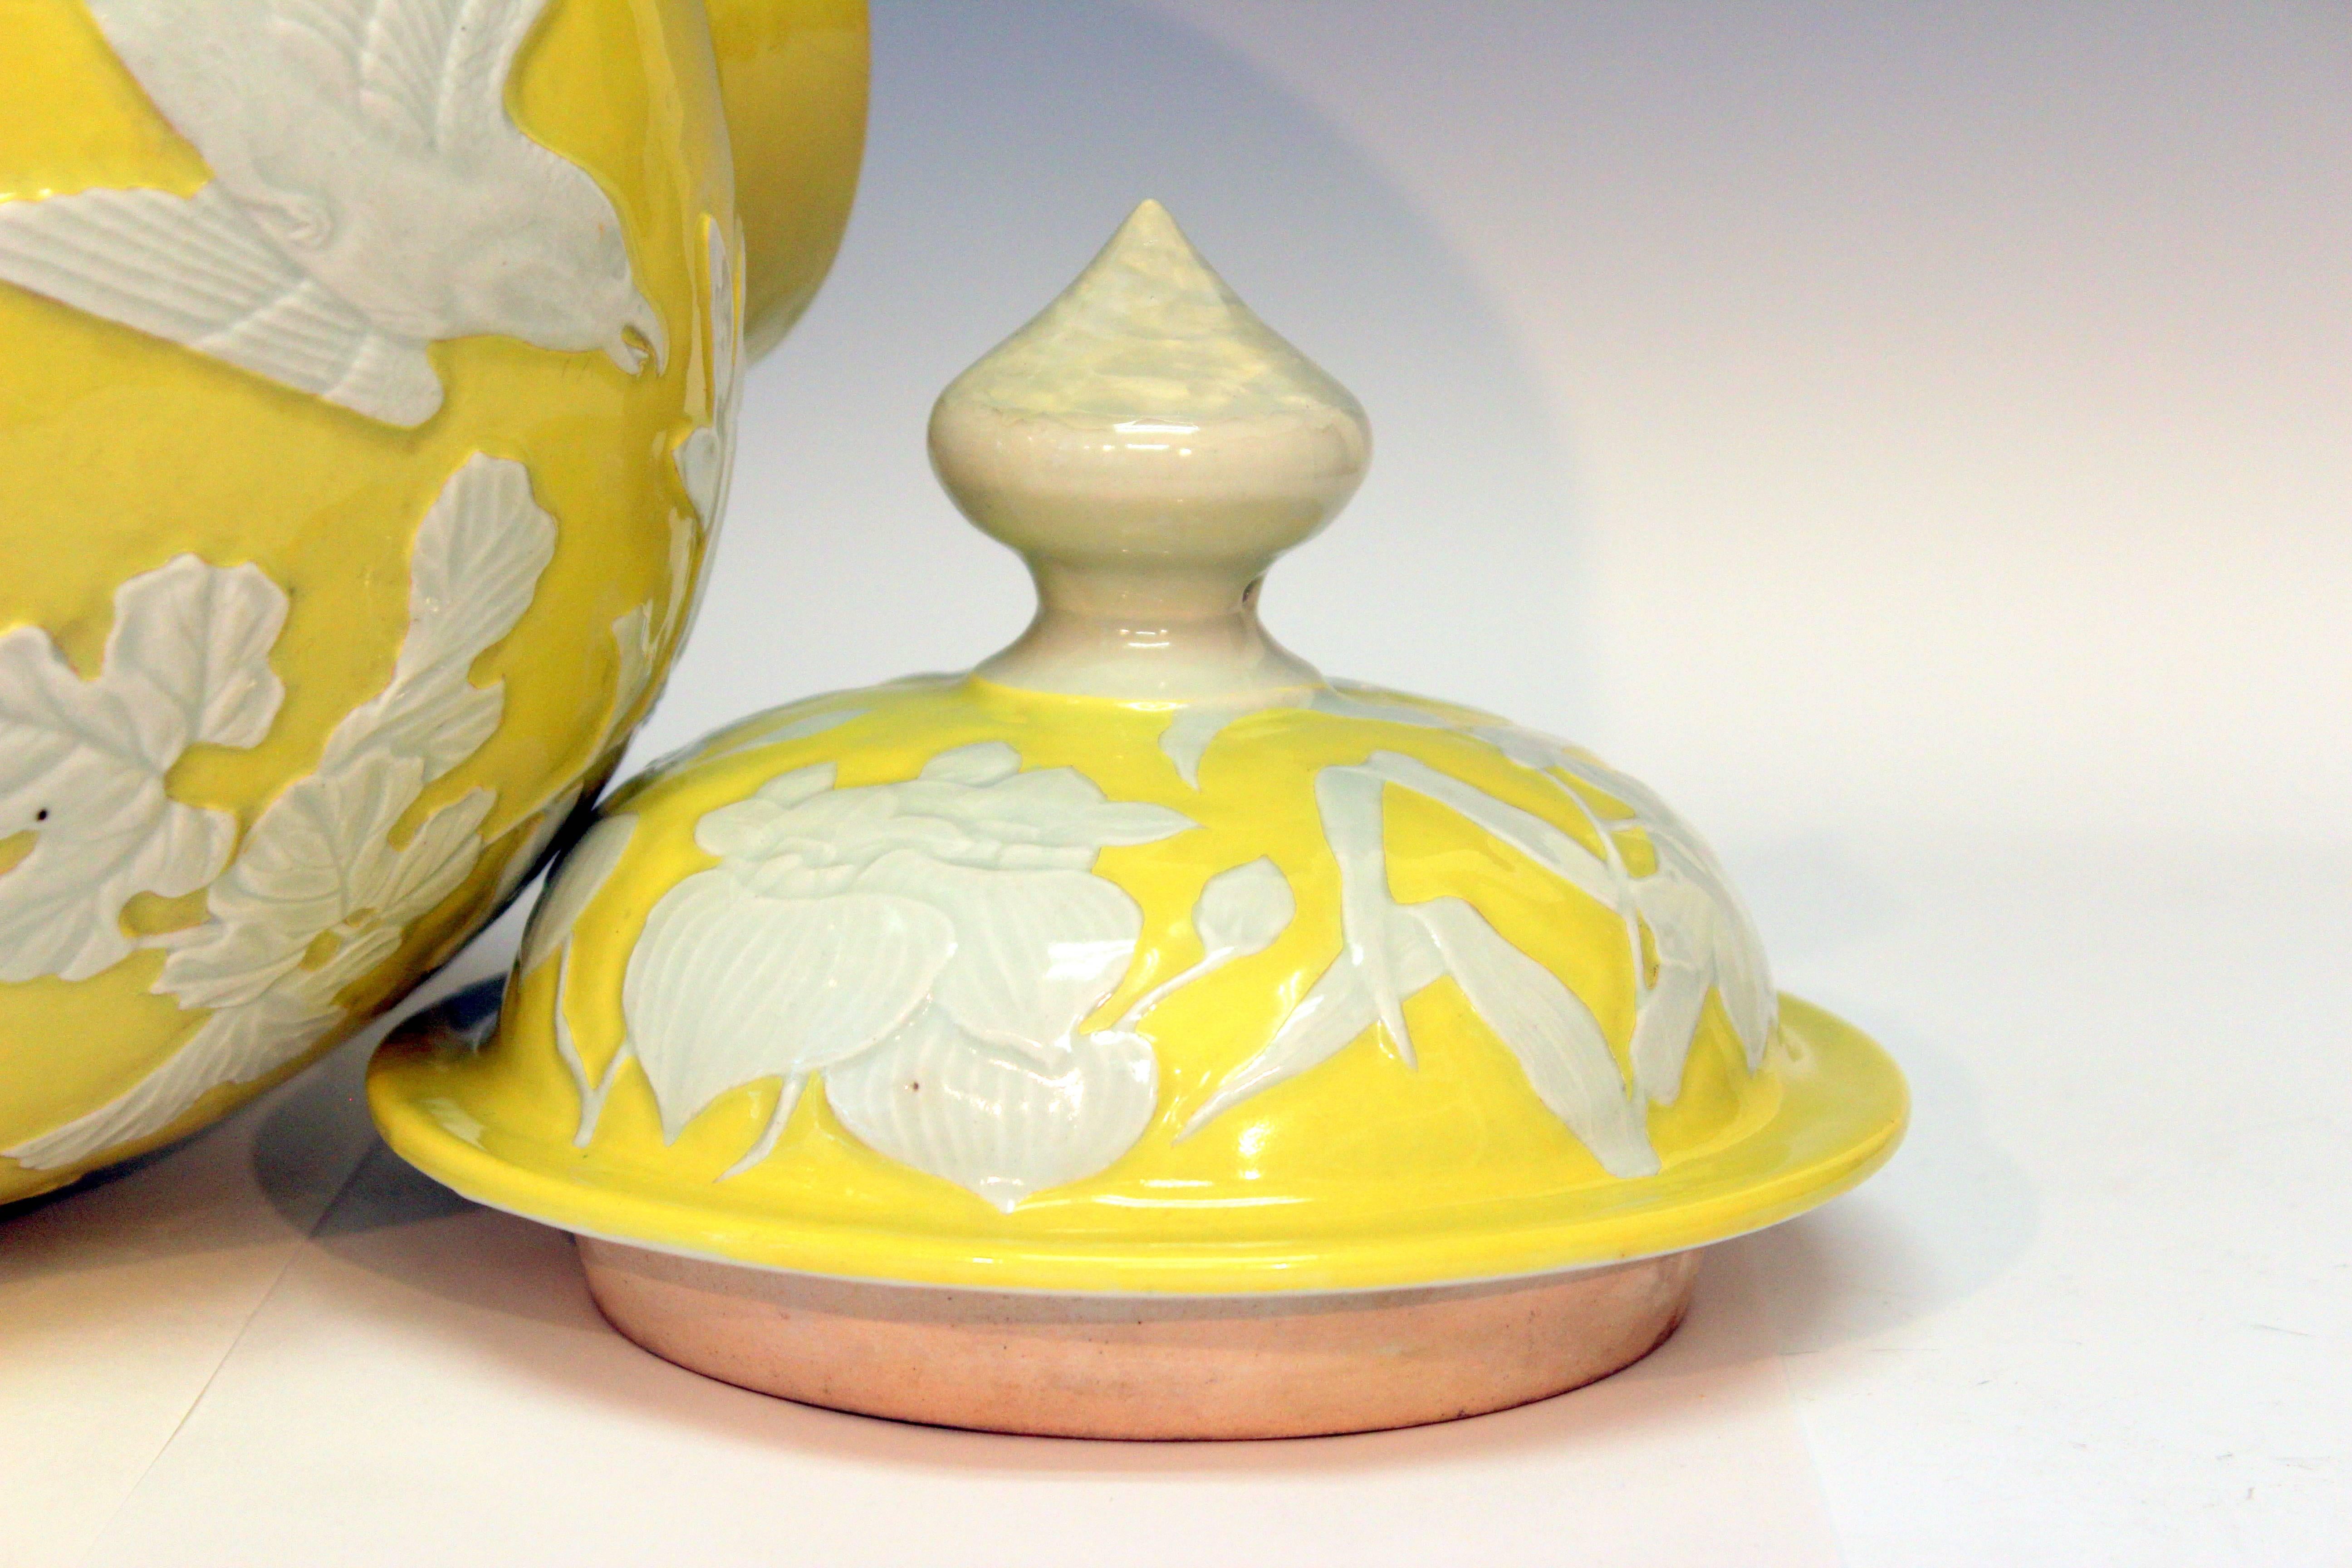 Anglo-Japanese Large Antique Japanese Carved Studio Porcelain Yellow Covered Urn Vase For Sale